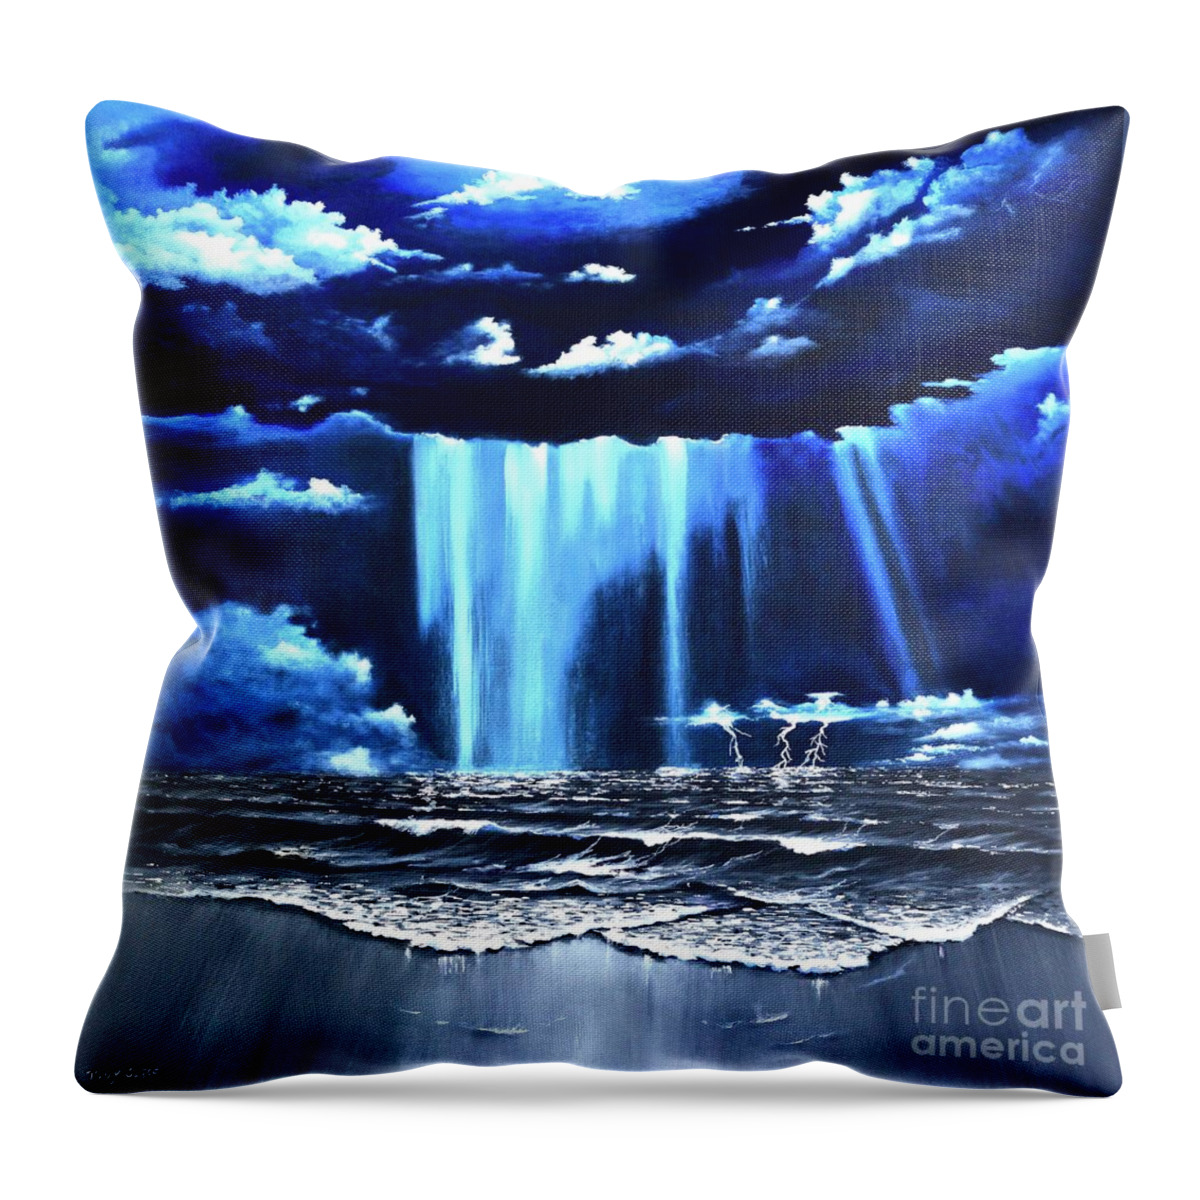 Rain Throw Pillow featuring the painting Moonlight Rain by Mary Scott